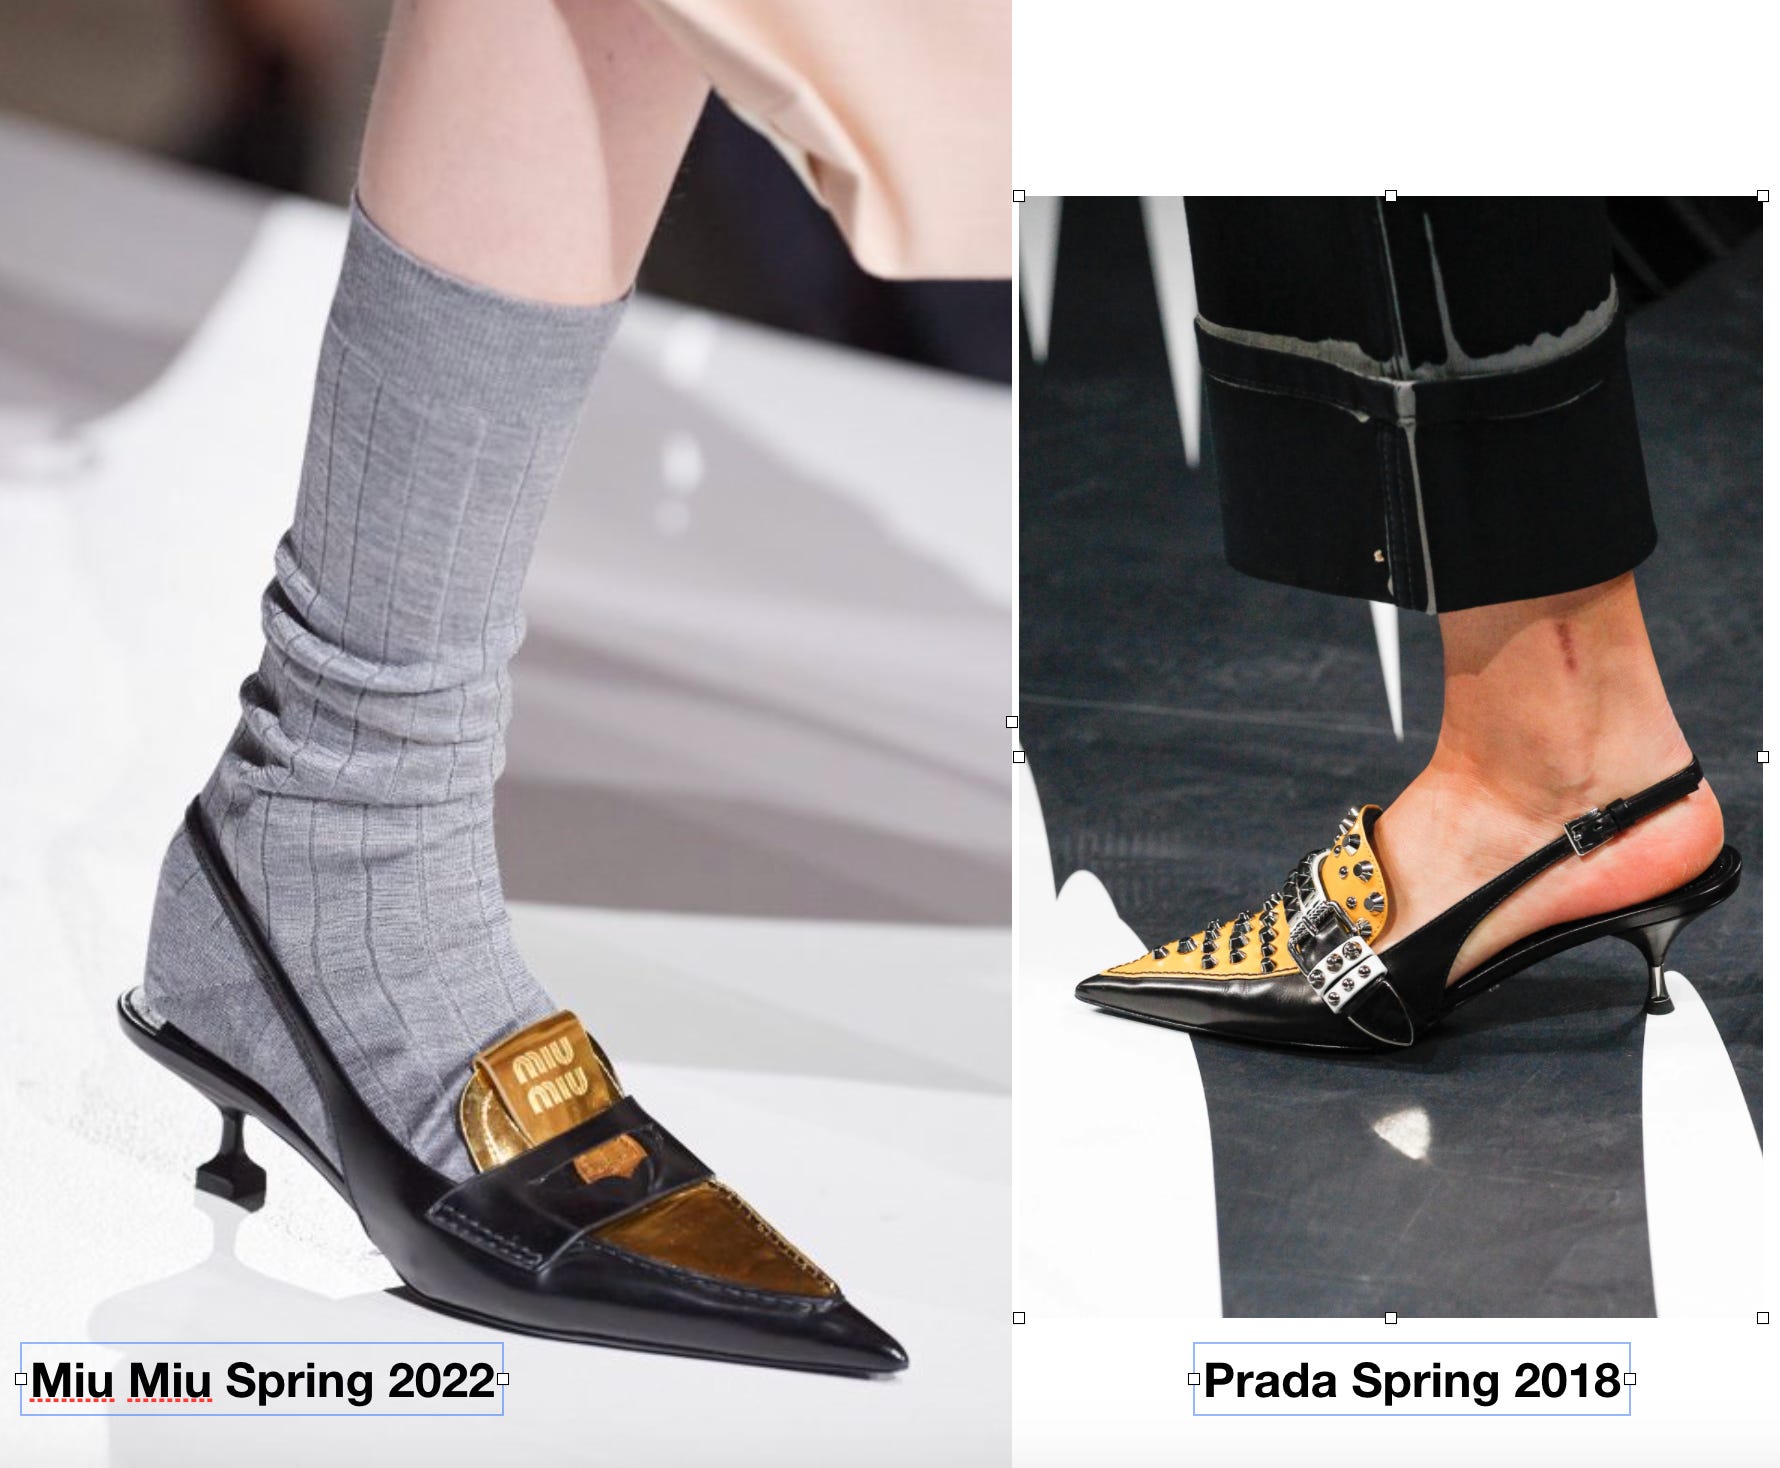 Kitten heel loafers: the solution to an age-old footwear conundrum?